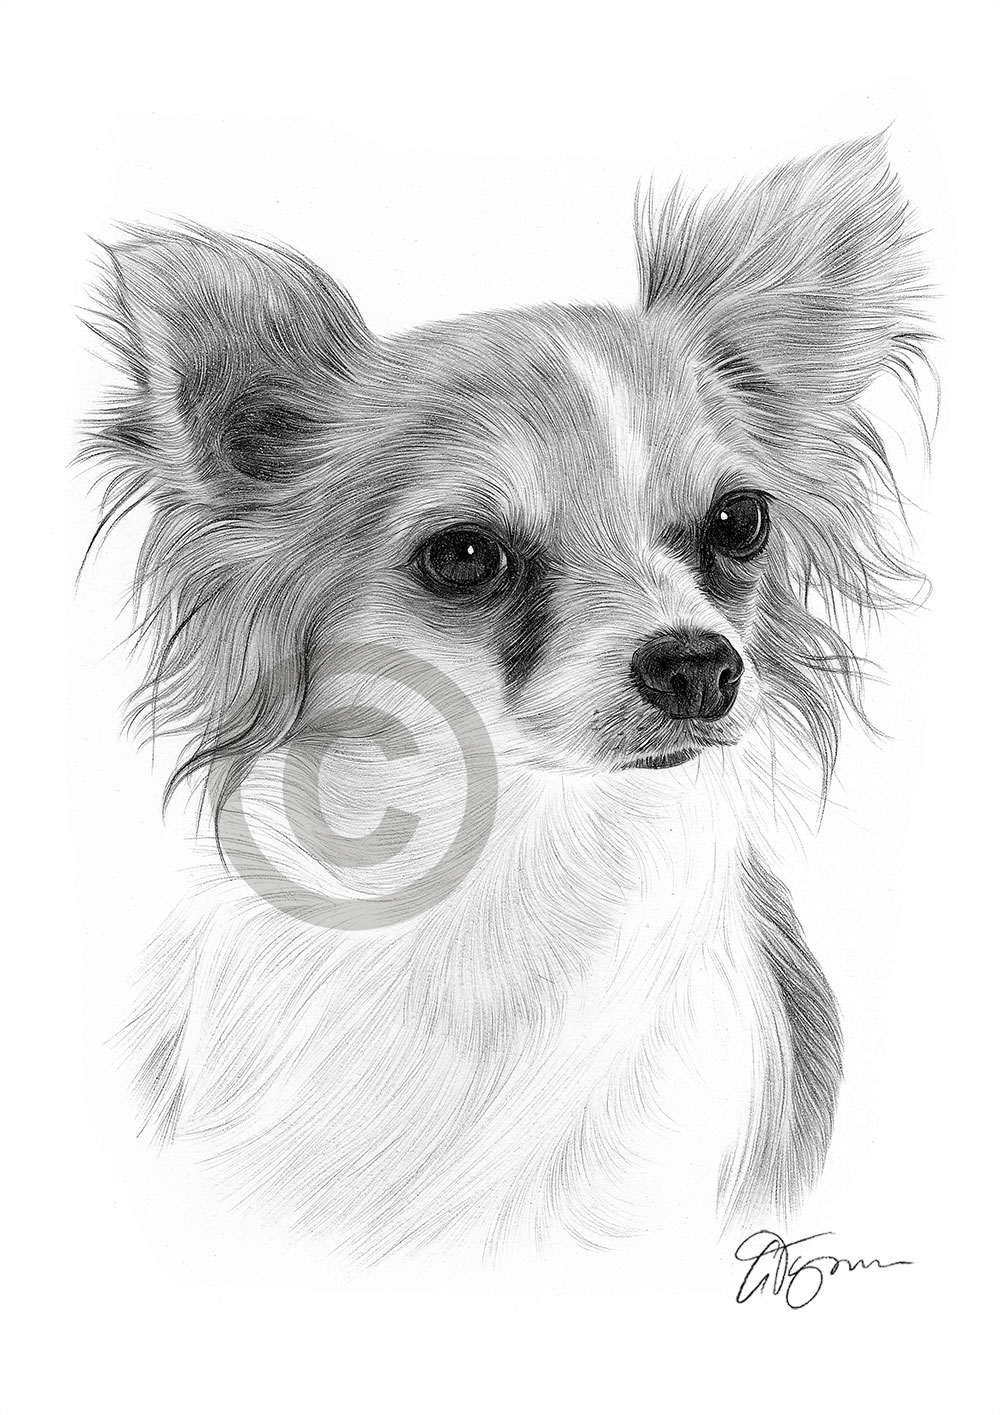 Pencil drawing of a young Chihuahua by artist Gary Tymon